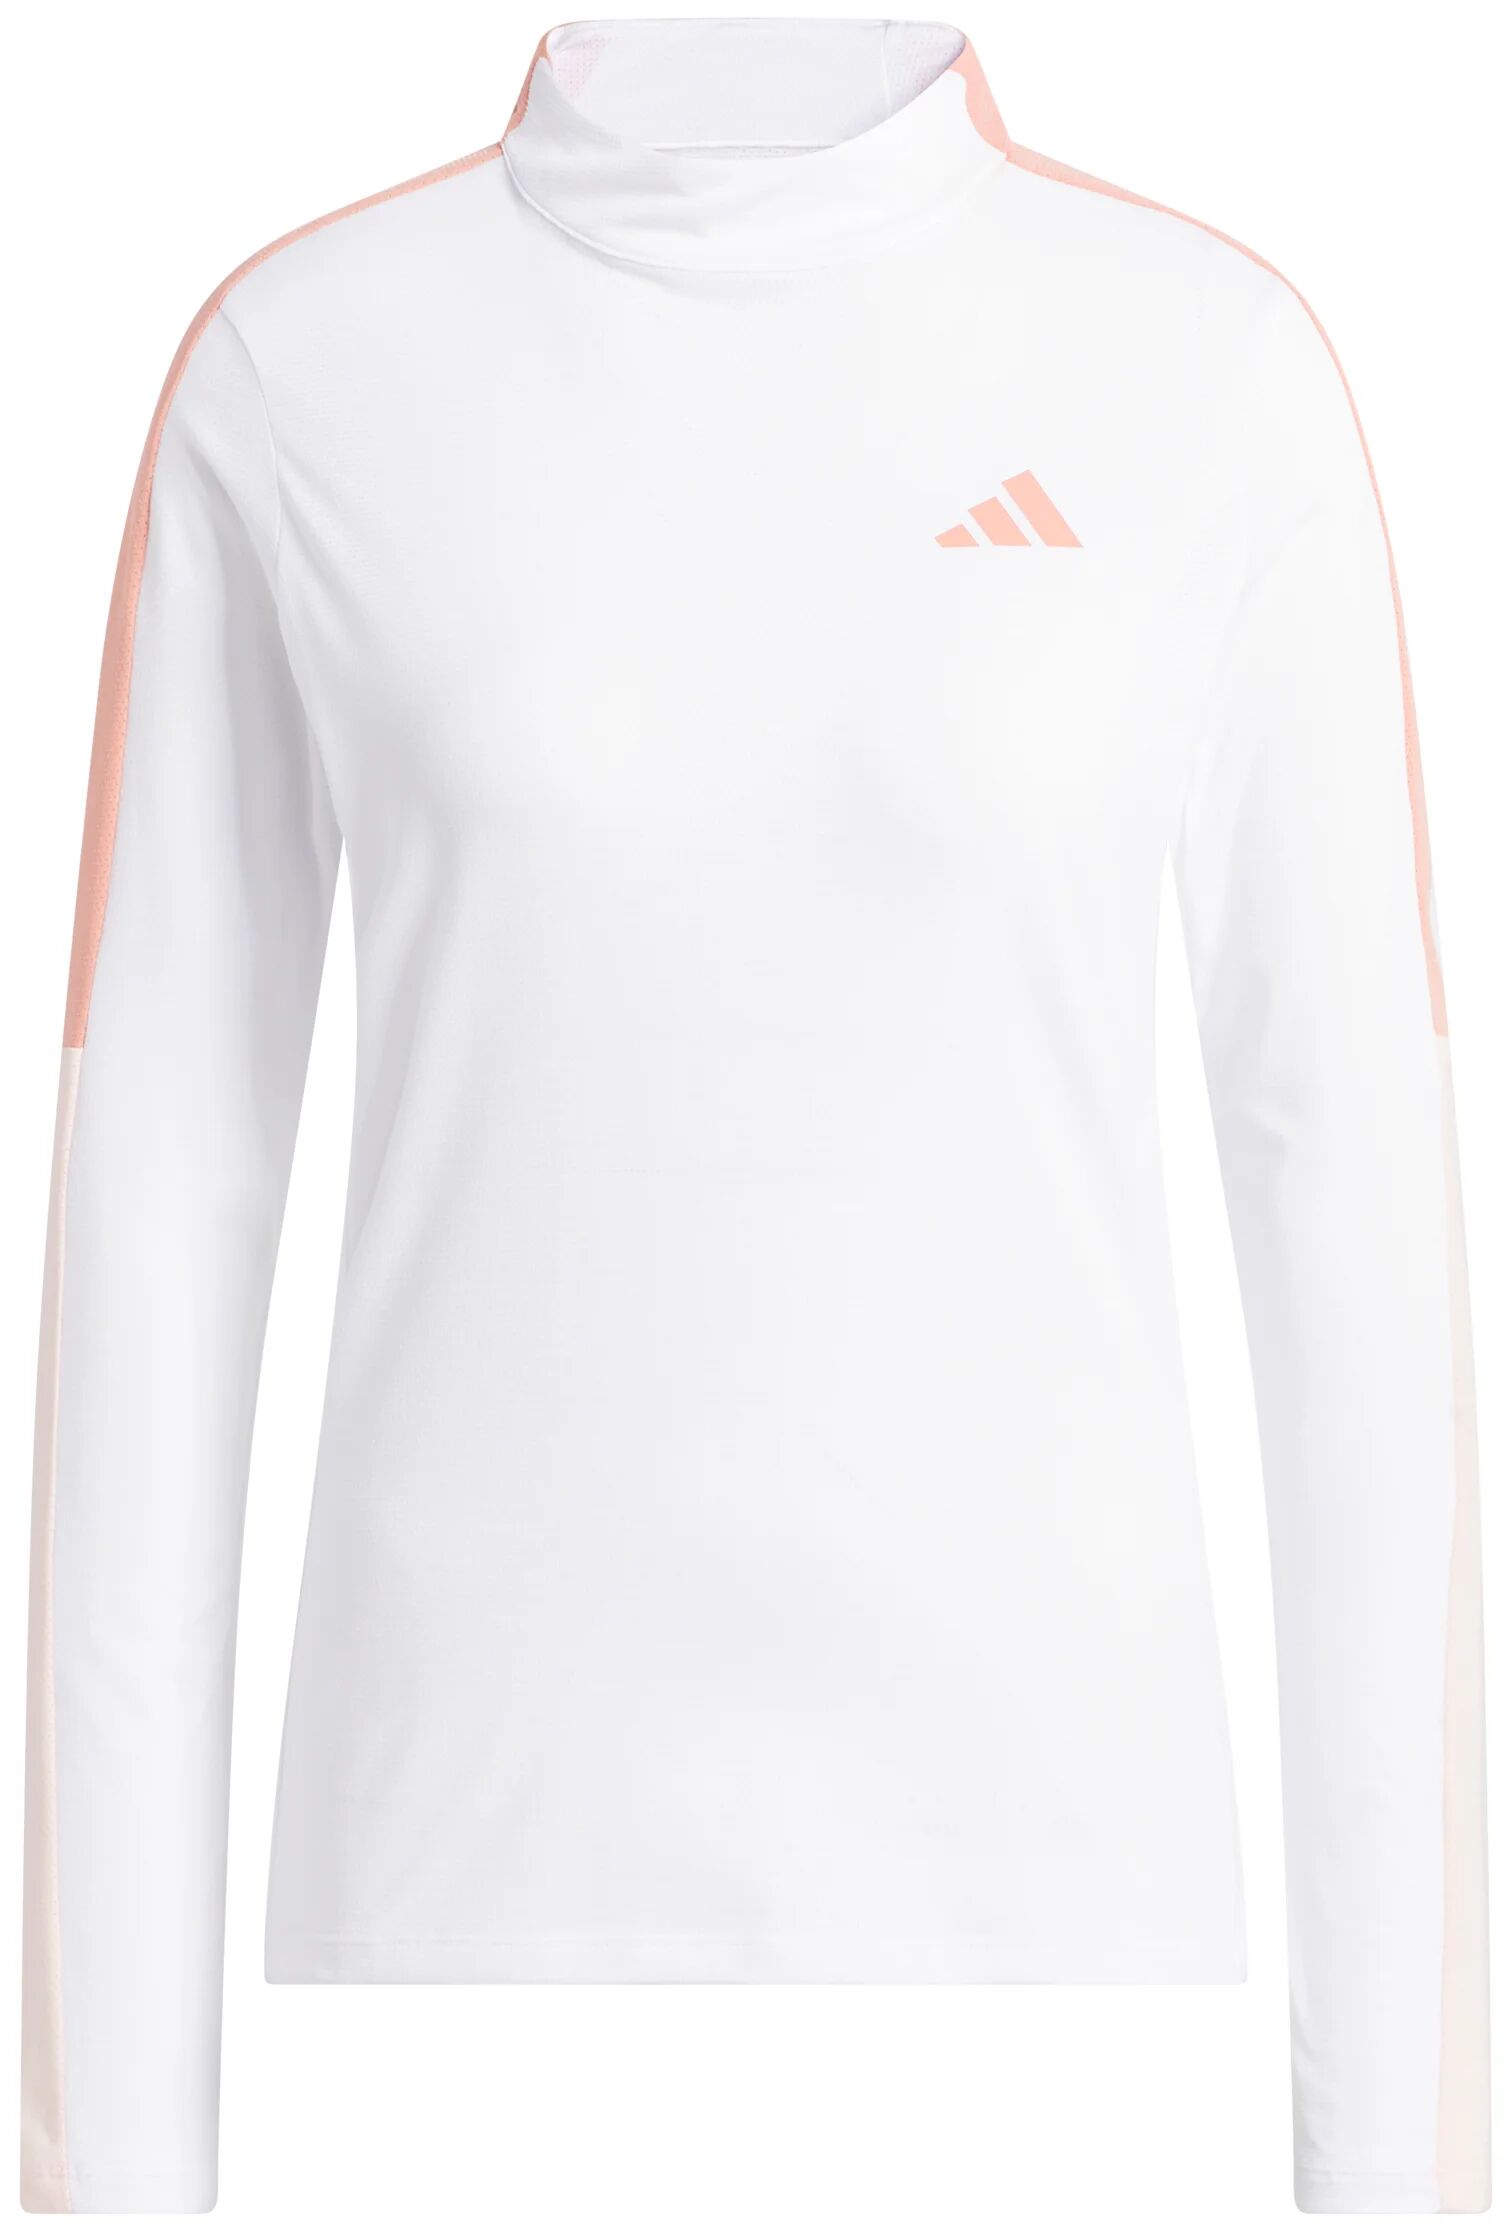 adidas Womens Made With Nature Mock Neck Long Sleeve Golf T-Shirt - White, Size: X-Large